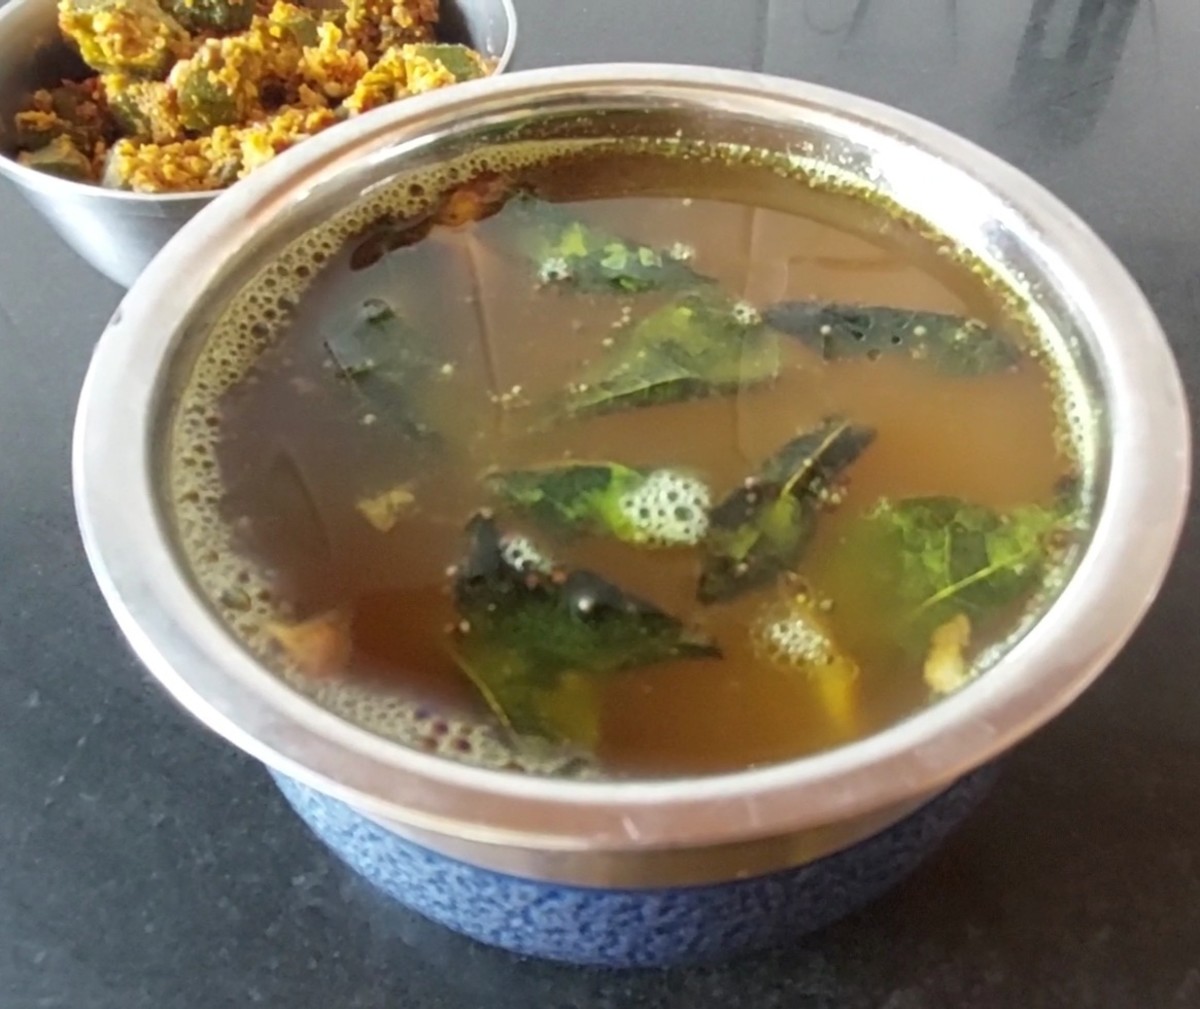 Tasty and healthy kokum rasam is ready to serve. Serve hot with rice .